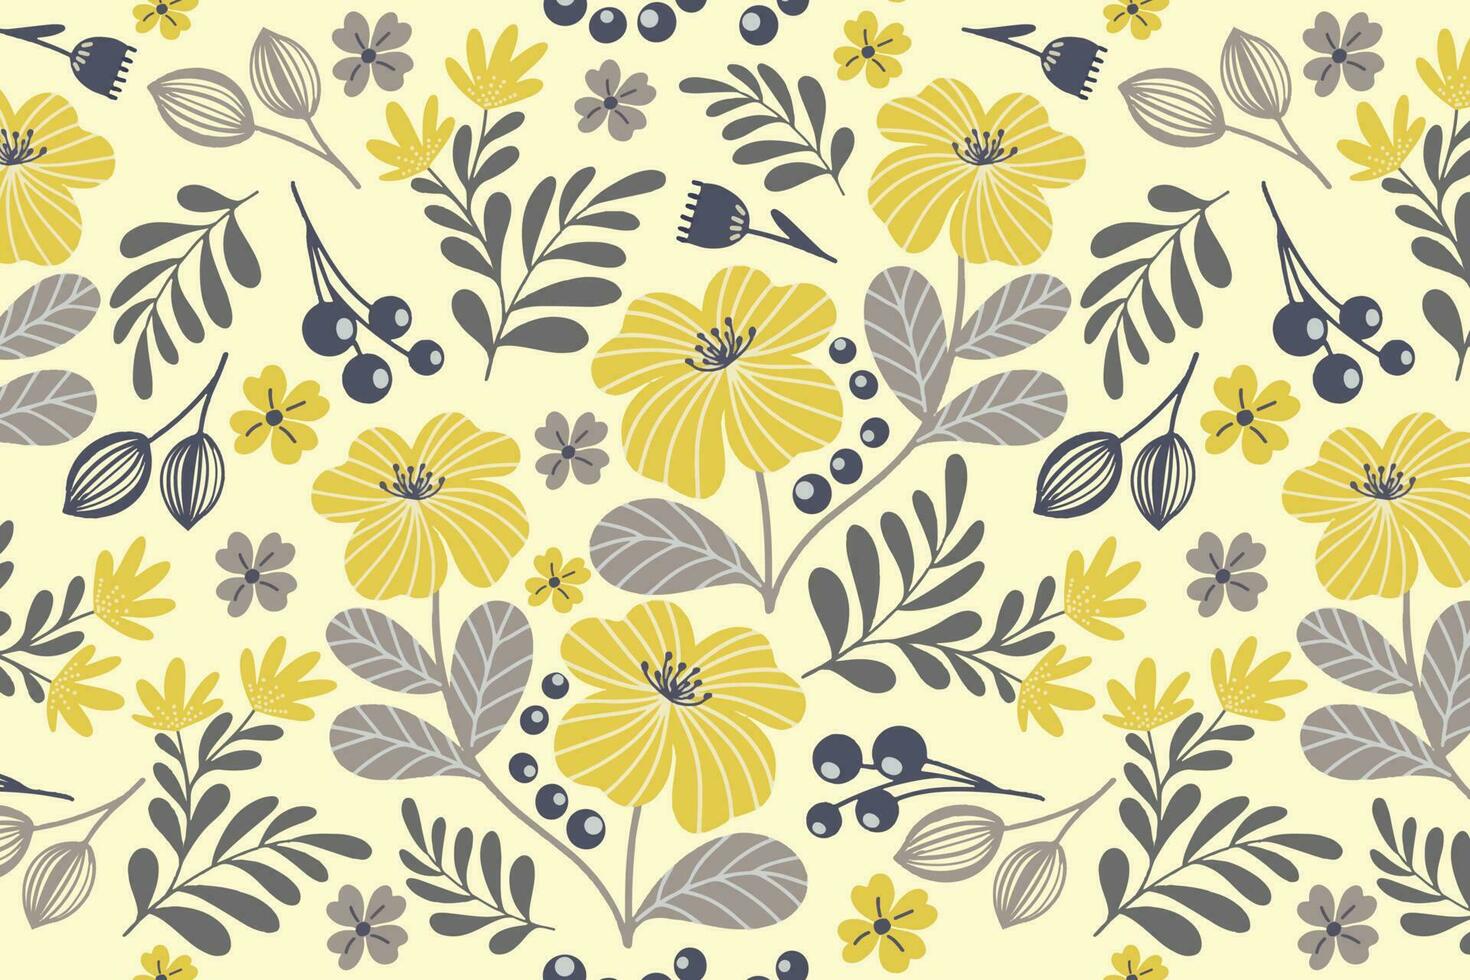 Trendy Flower seamless patterns. Cool abstract and pastel flower design. For fashion fabrics, kids clothes, home decor, quilting, T-shirts, cards and templates, scrapbook and other digital needs vector